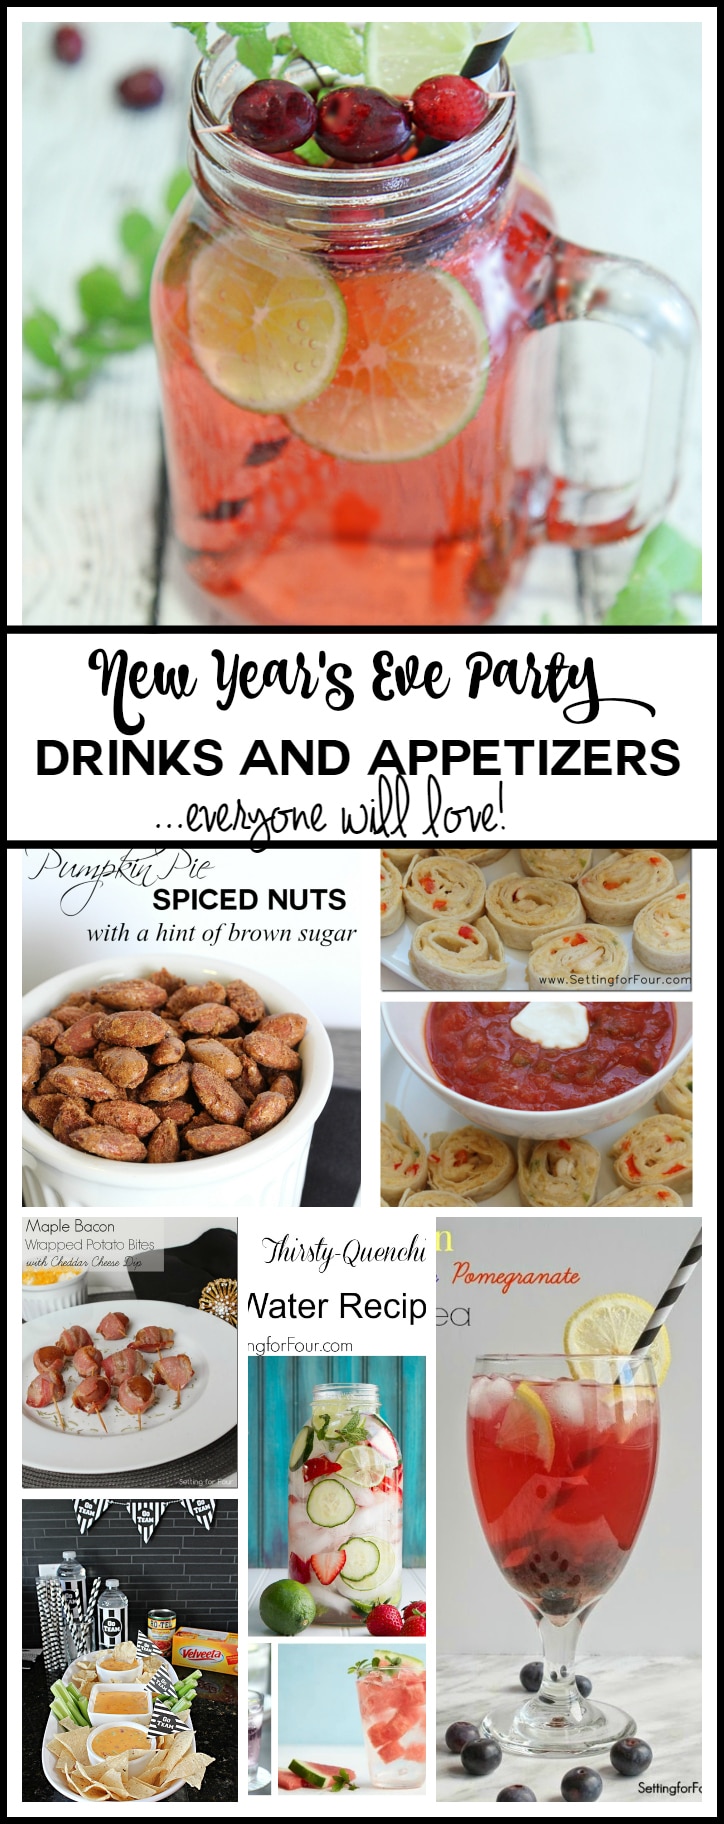 Yummy EASY Drinks and Appetizers for New Year's Eve - recipes everyone will love! www.settingforfour.com